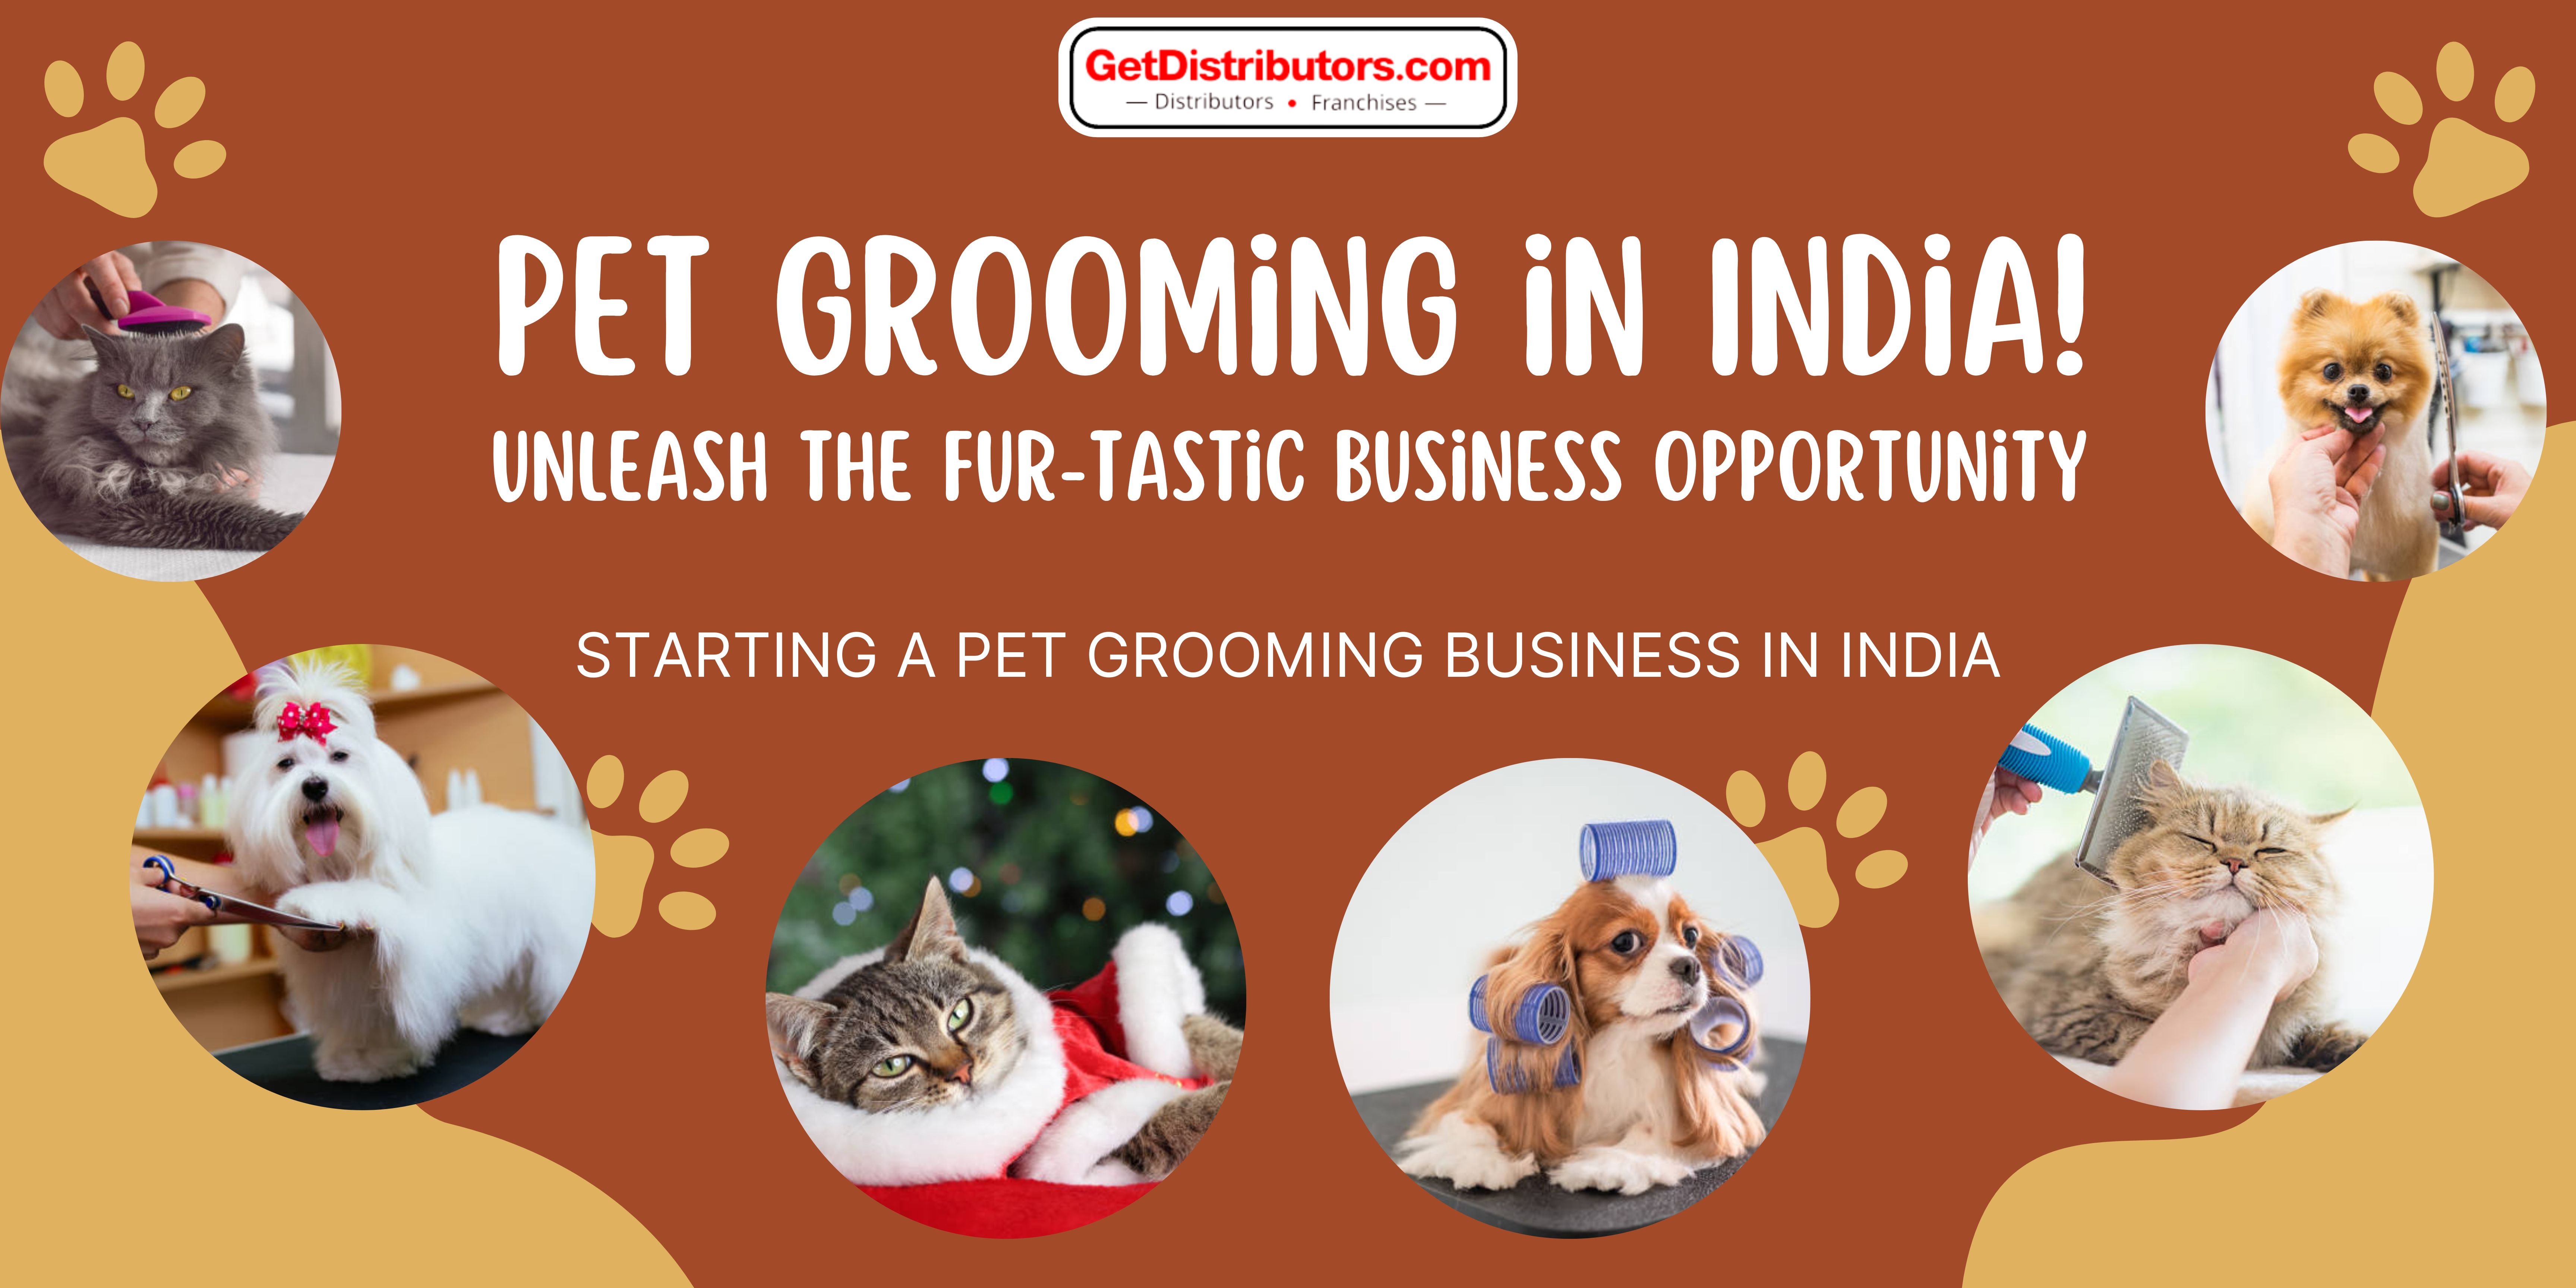 Pet Grooming in India!: Unleash the Fur-tastic Business Opportunity